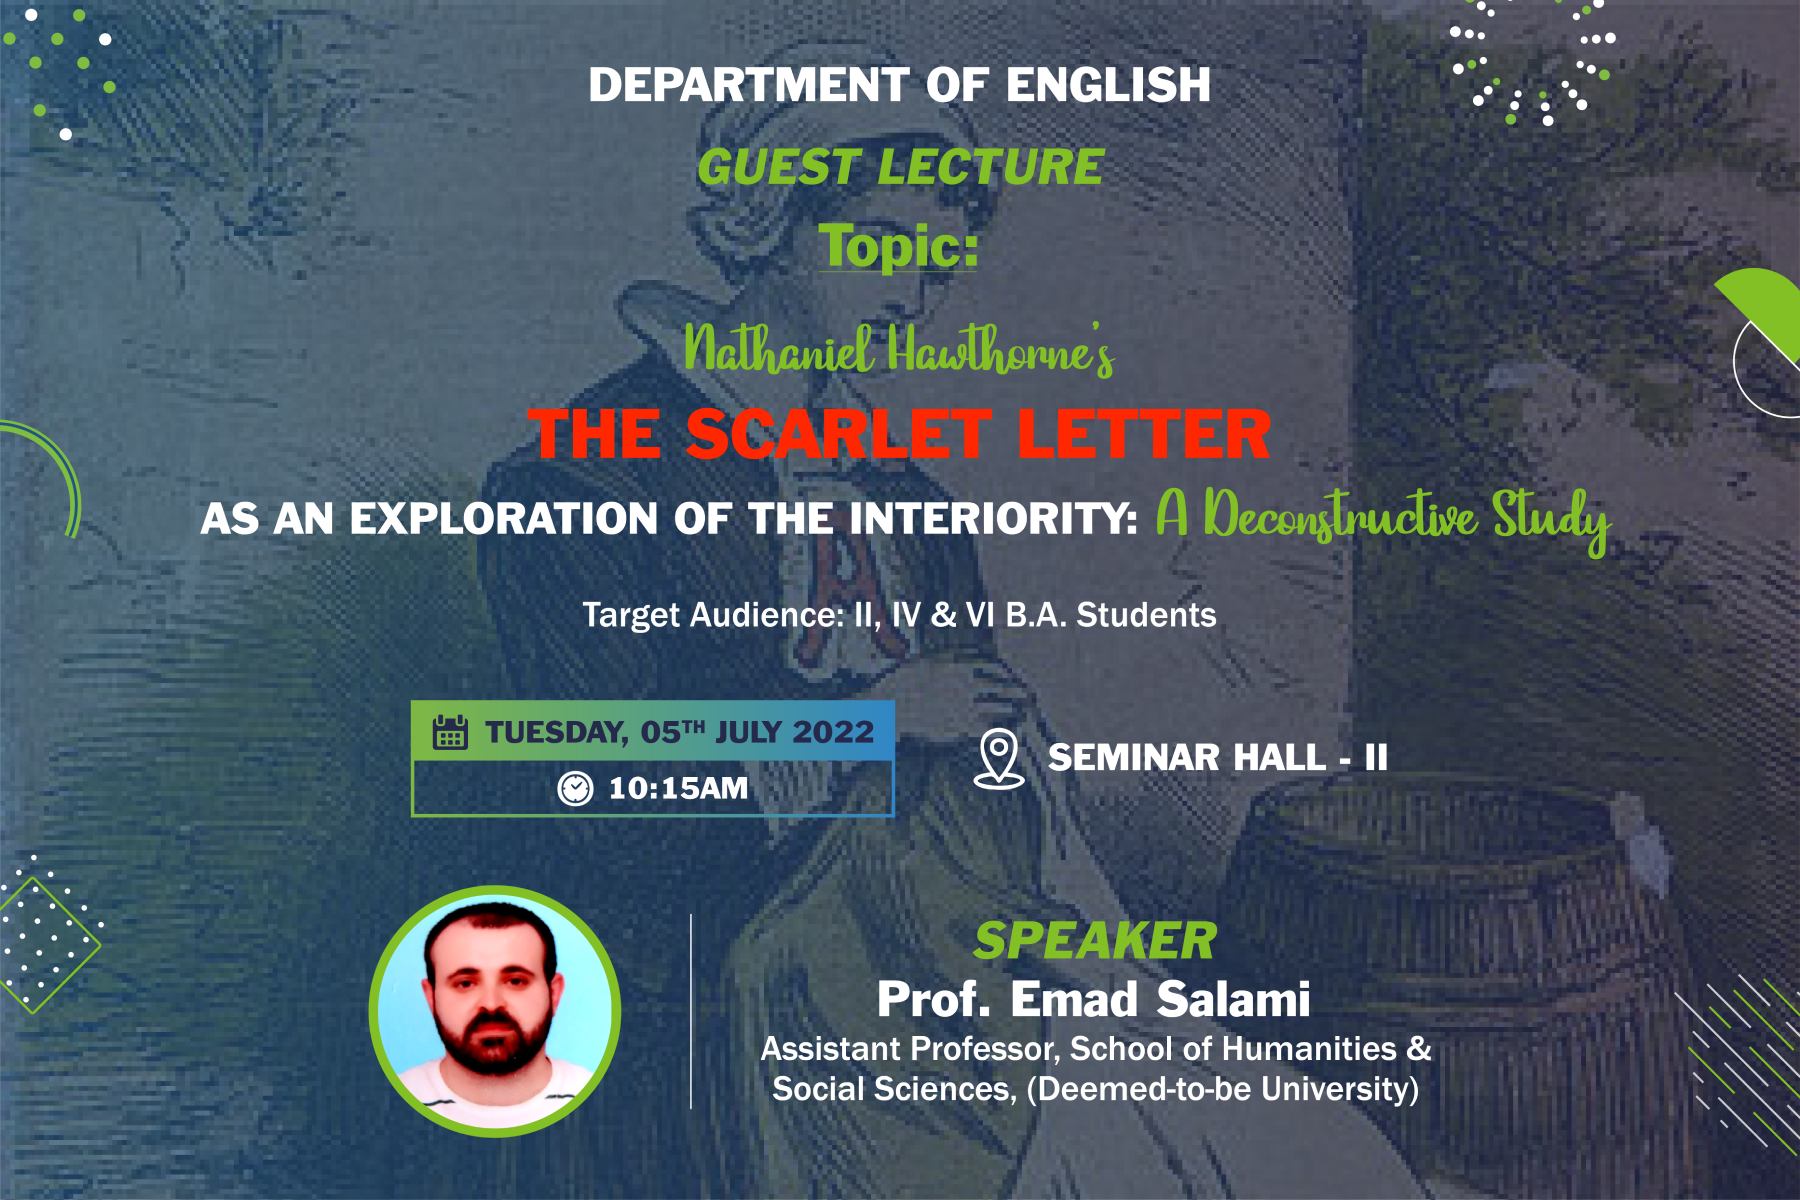 Guest lecture on Nathaniel Hawthorne’s- The Scarlet Letter as an Exploration of the Interiority: A Deconstructive Study